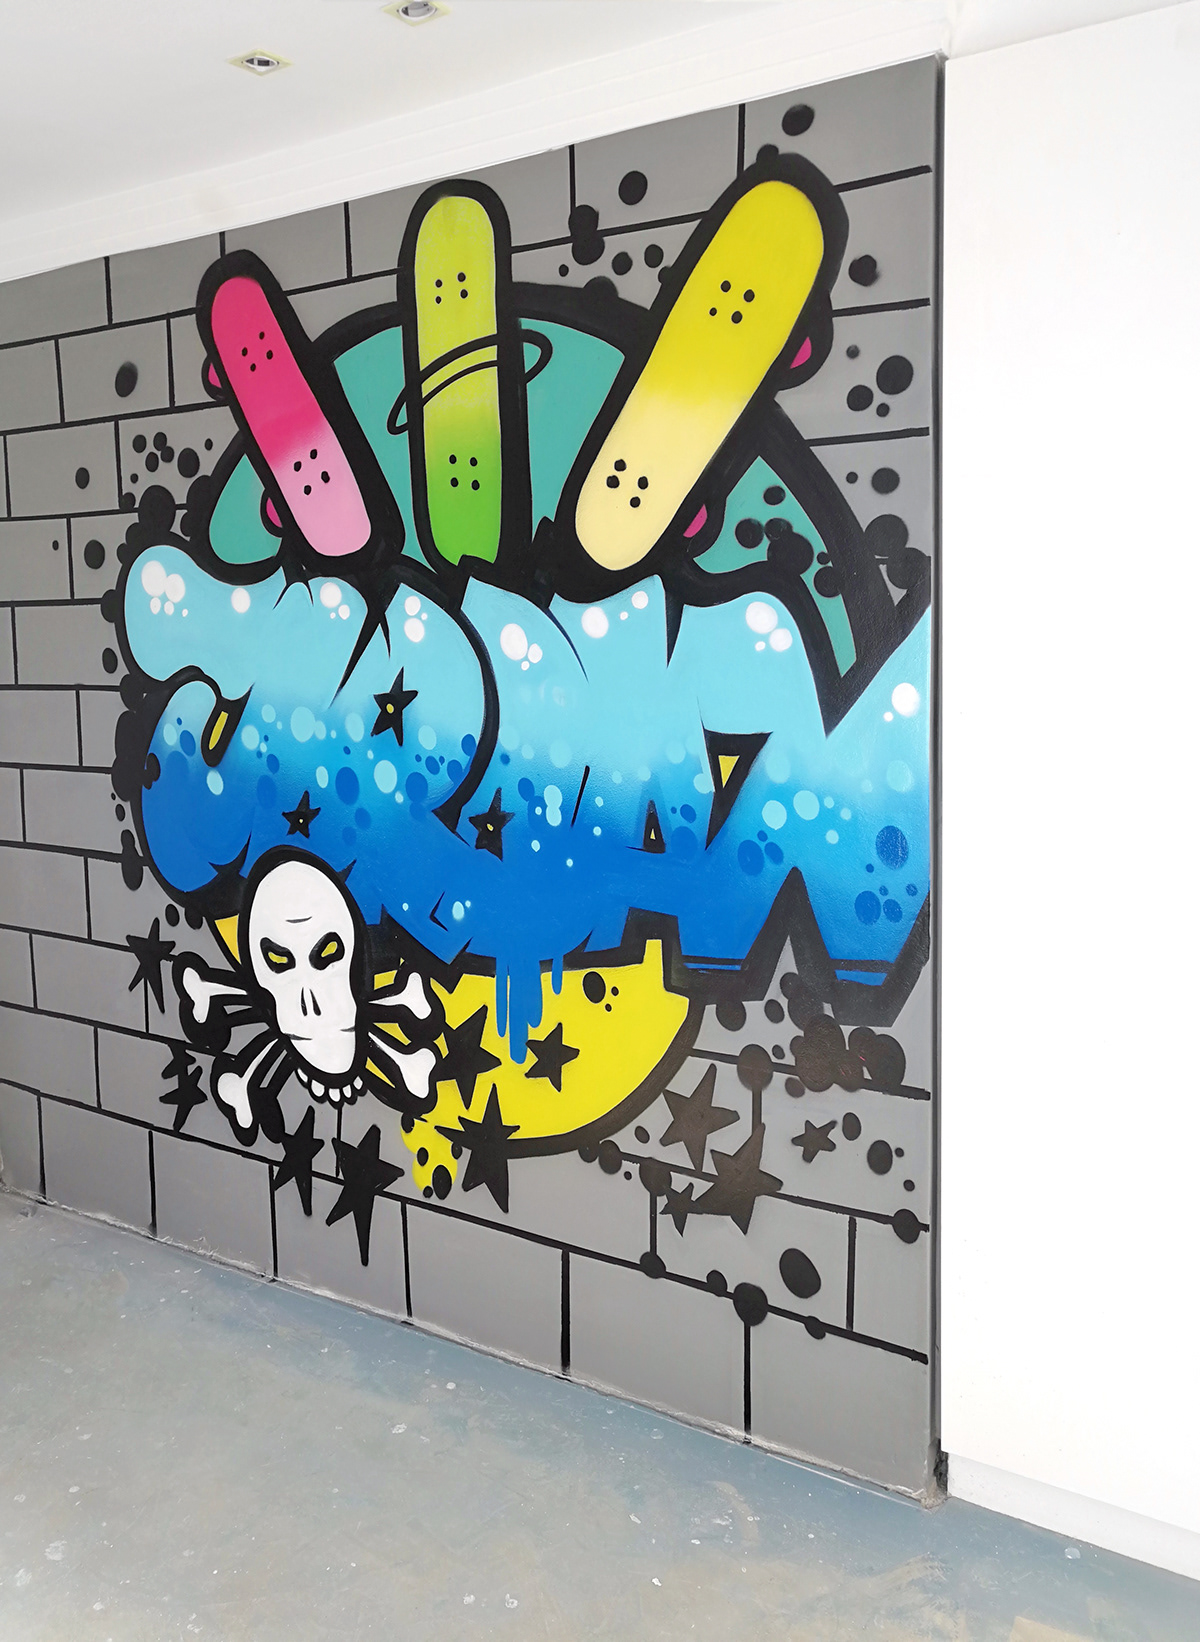 art Character Mural letters #cape town  #SouthAfrica #graffiti #arhcitecture #letter   #interior